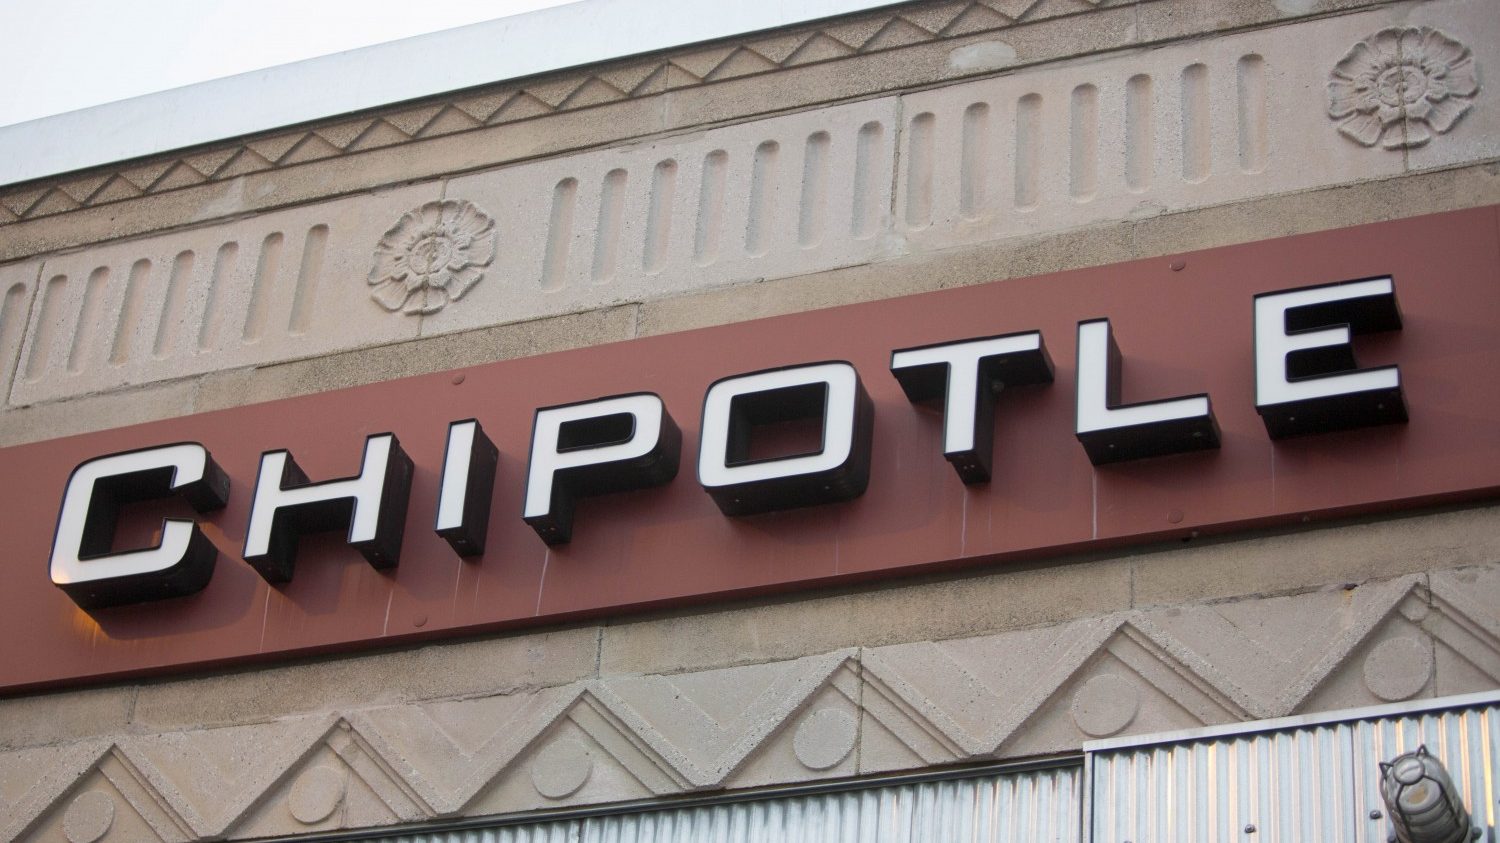 80 Boston College Students Fall Ill After Eating At Chipotle Restaurant